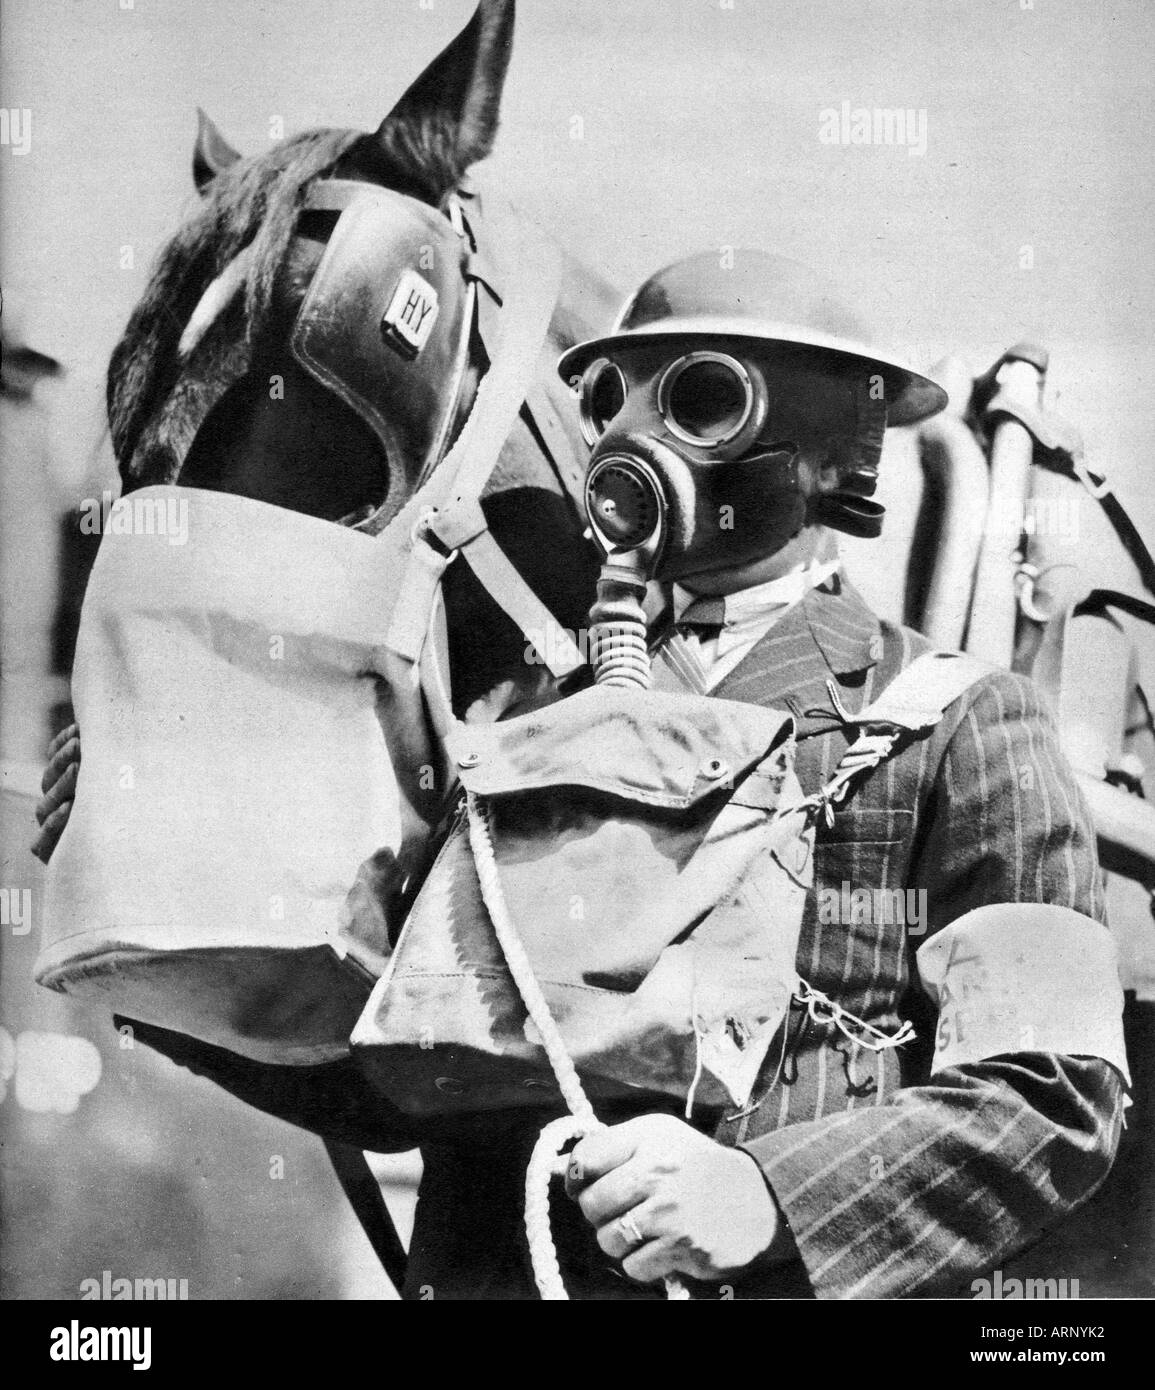 Blitz Animal ARP Service in 1940 England with a gas mask for the horse as well as the warden Stock Photo